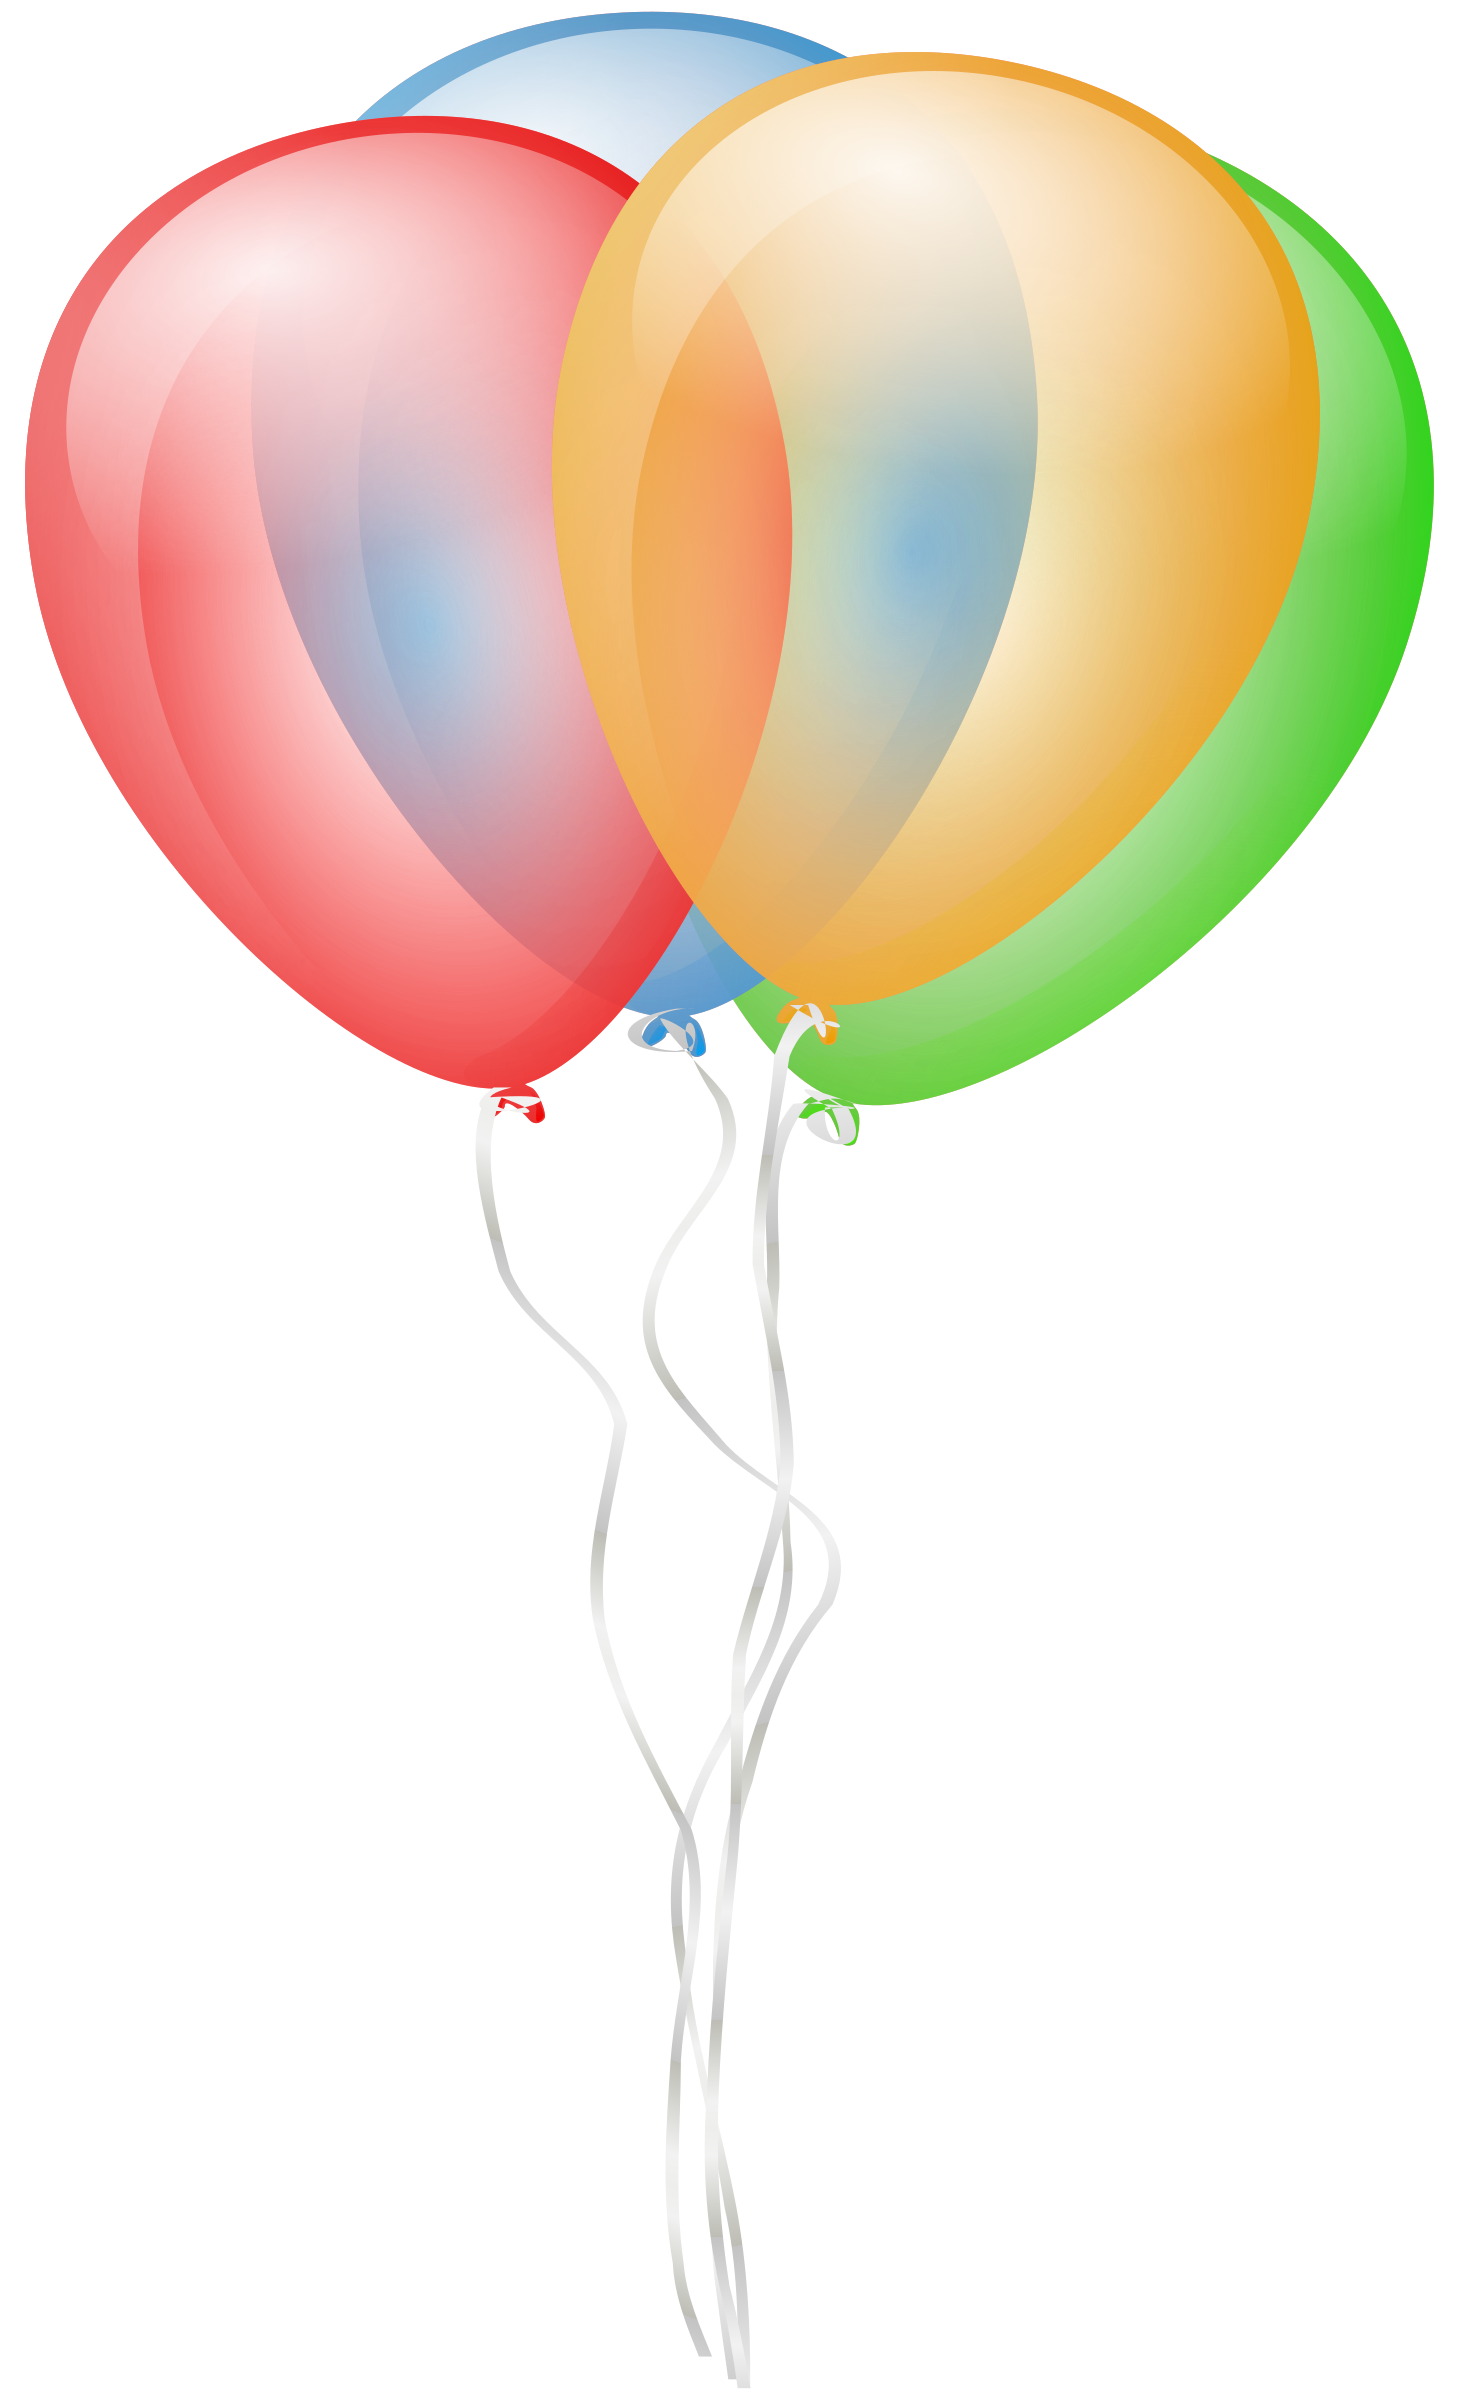 Fireworks clipart balloon. Balloons big image png